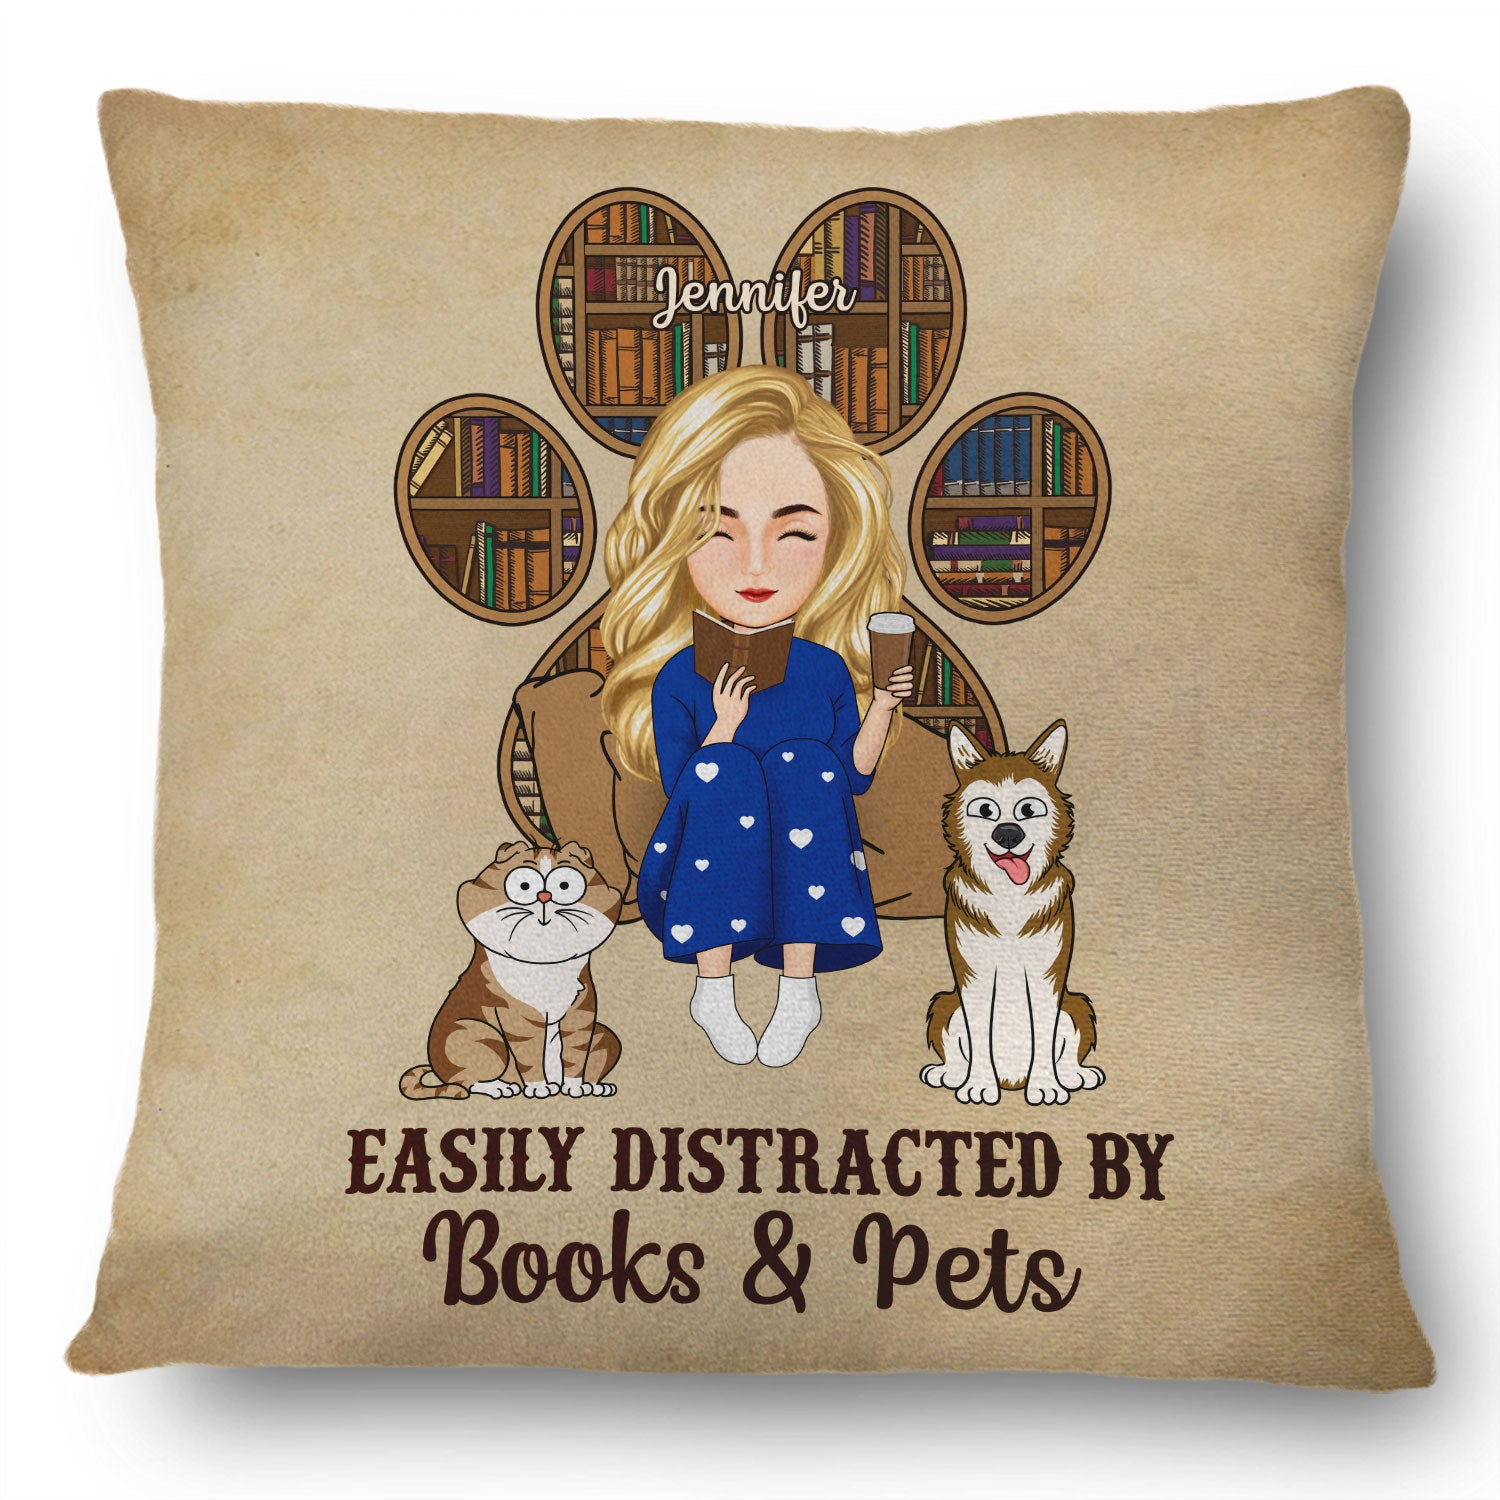 Reading Easily Distracted By Dogs & Books - Gift For Book Lovers, Pet Lovers - Personalized Pillow